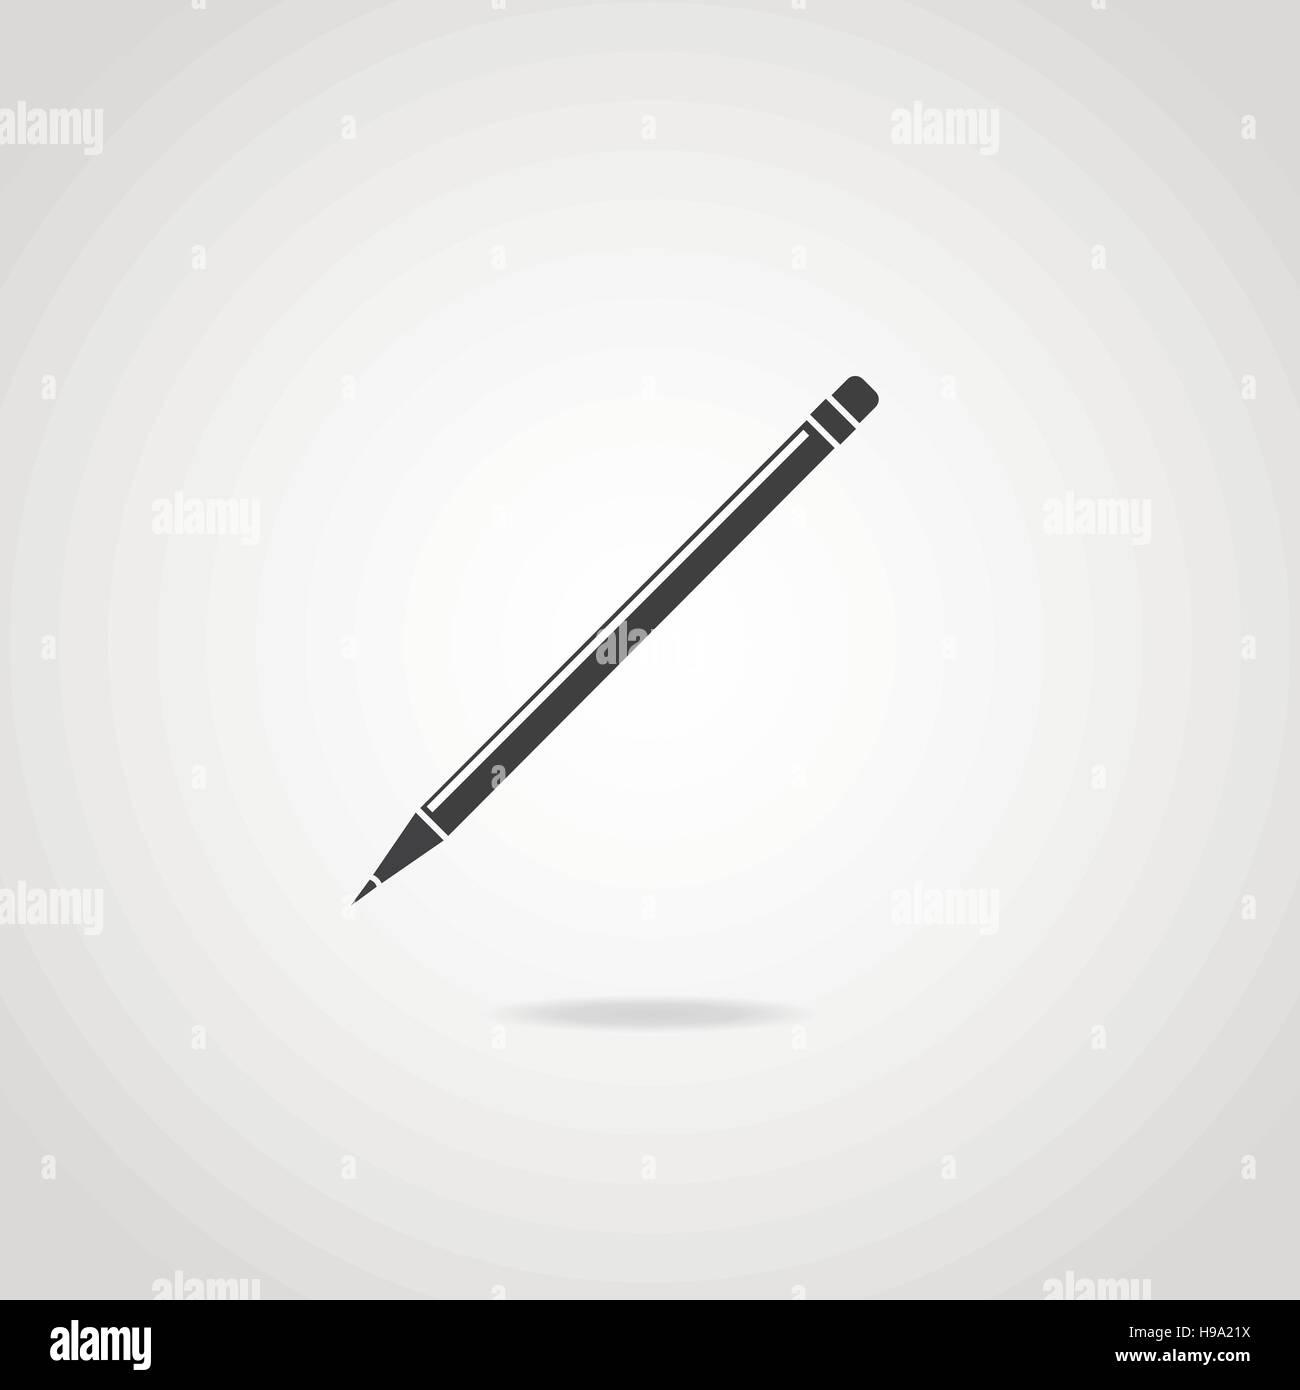 Black icon of wooden thin pencil. Rubber and sharp tip. Stock Vector